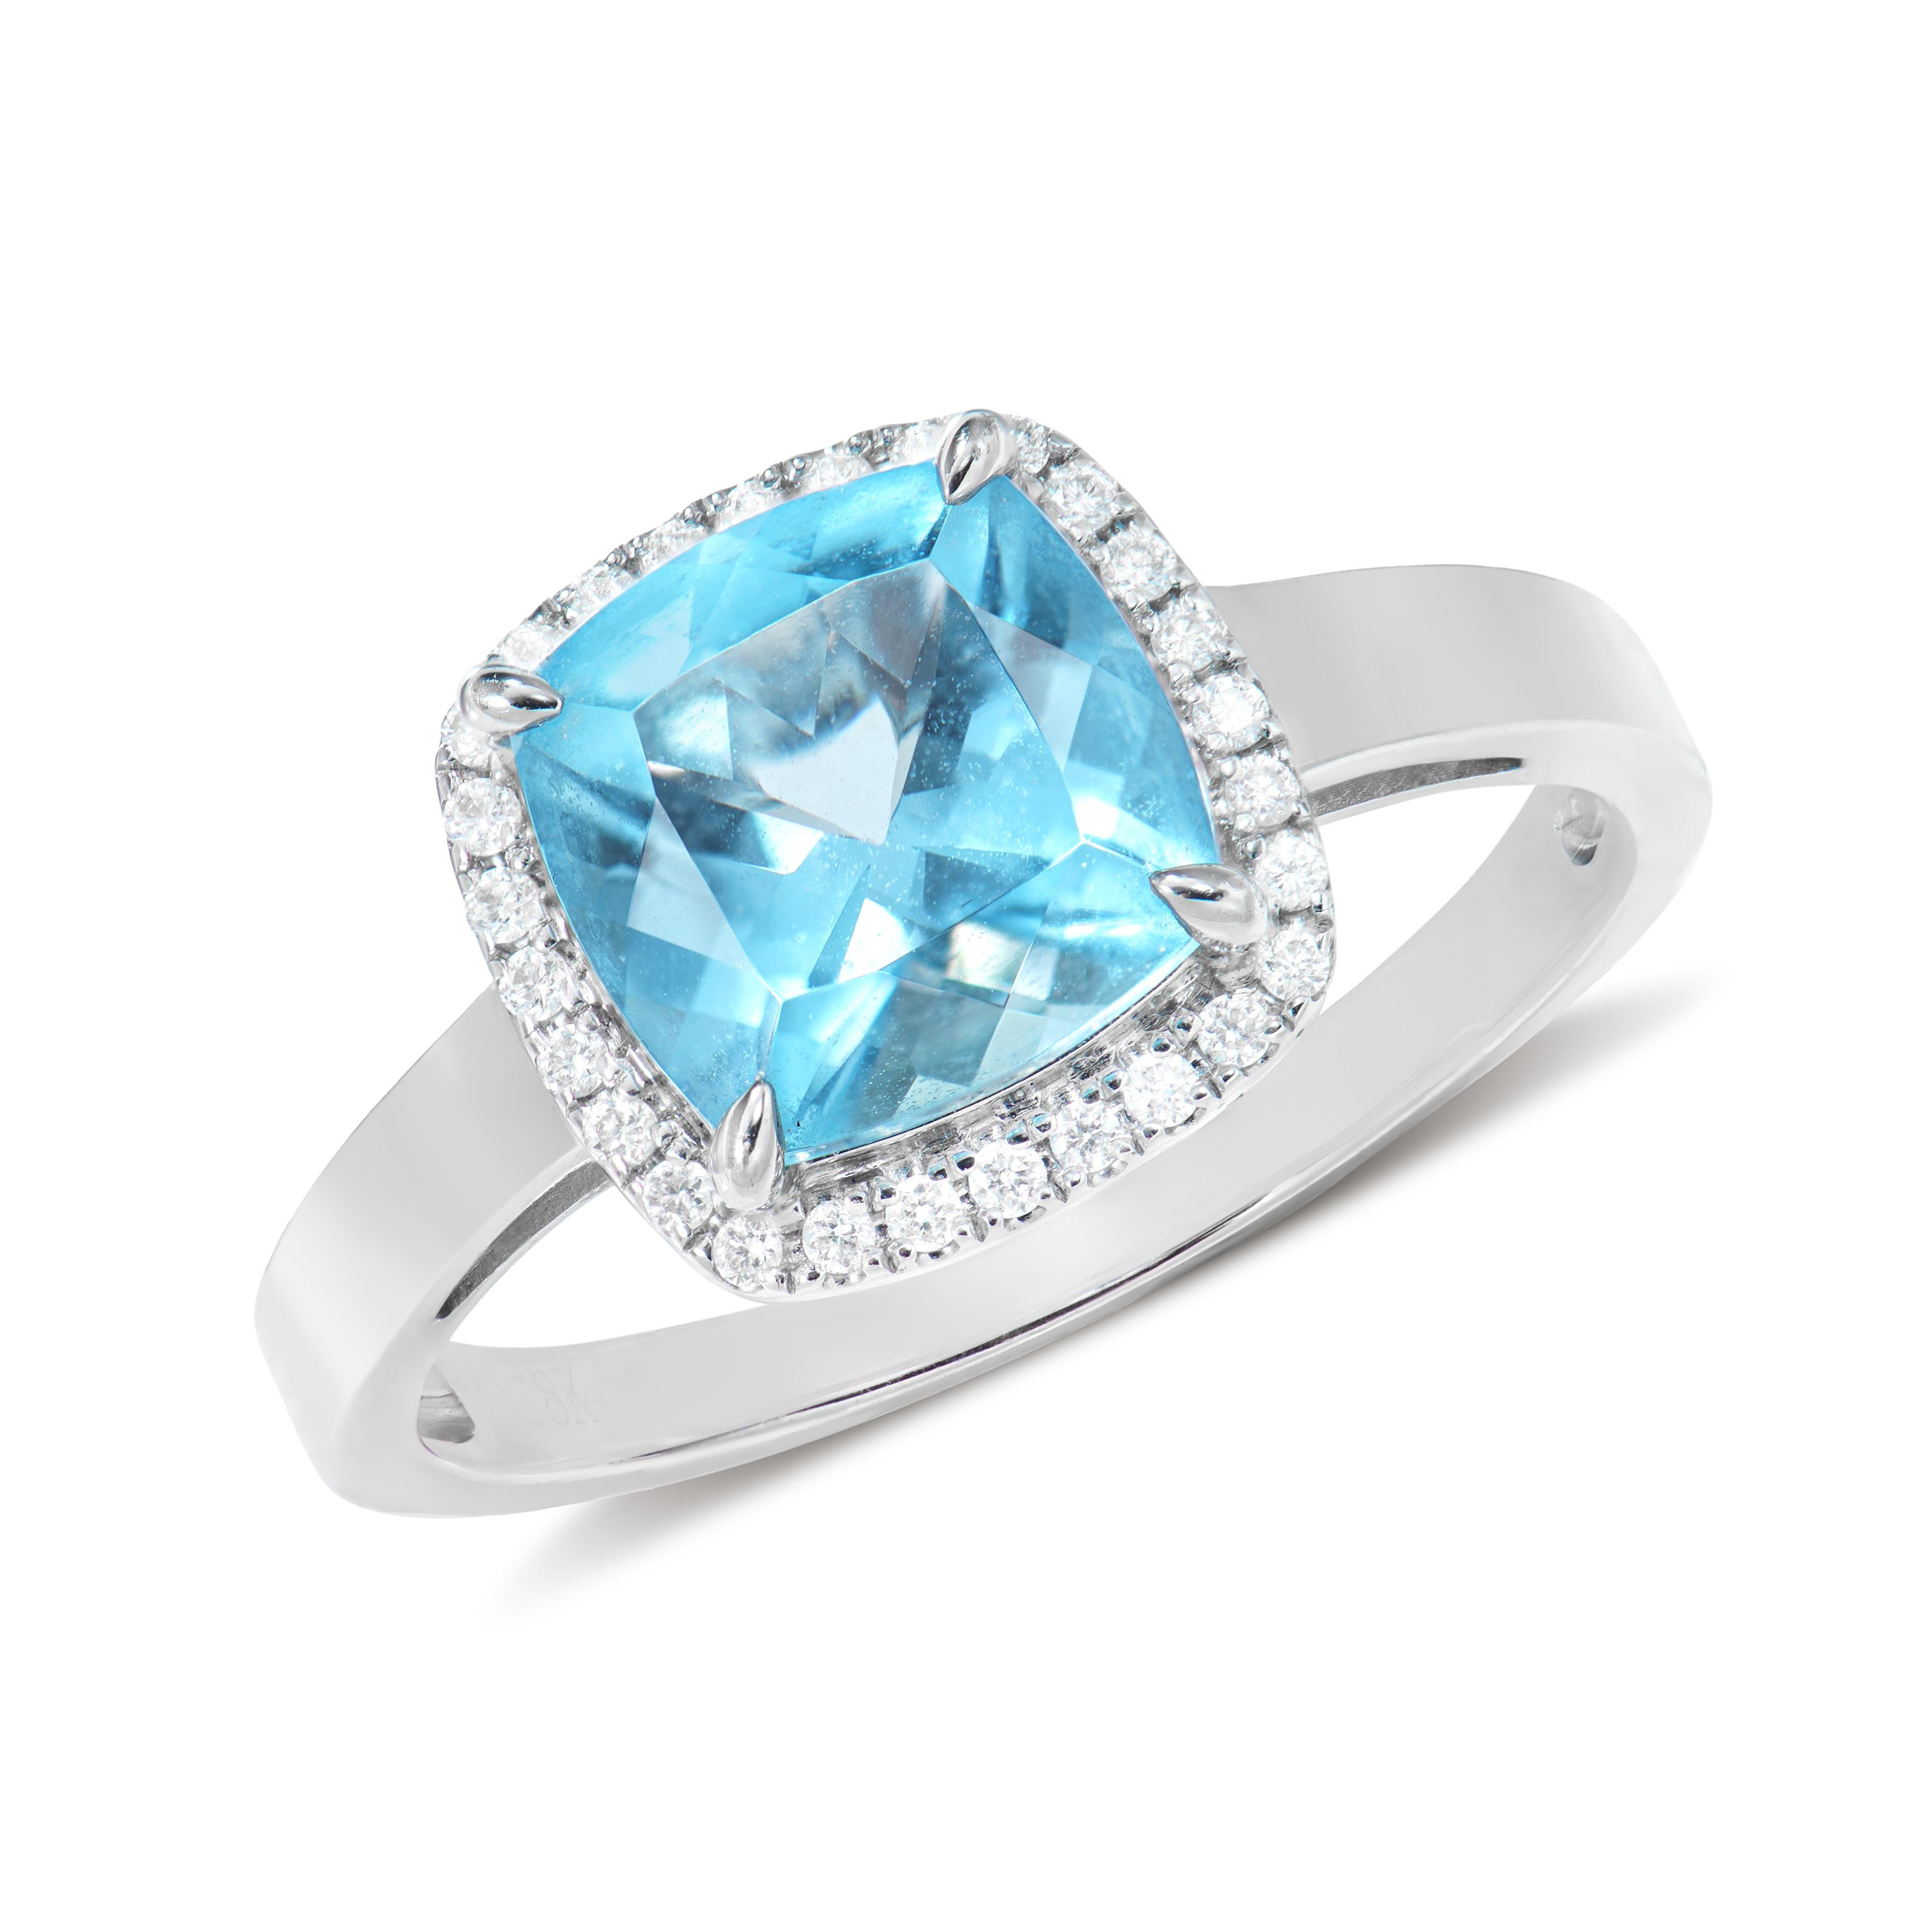 Presented A lovely collection of gems, including Amethyst, Peridot, Rhodolite, Sky Blue Topaz, Swiss Blue Topaz and Morganite is perfect for people who value quality and want to wear it to any occasion or celebration. The white gold sky blue topaz